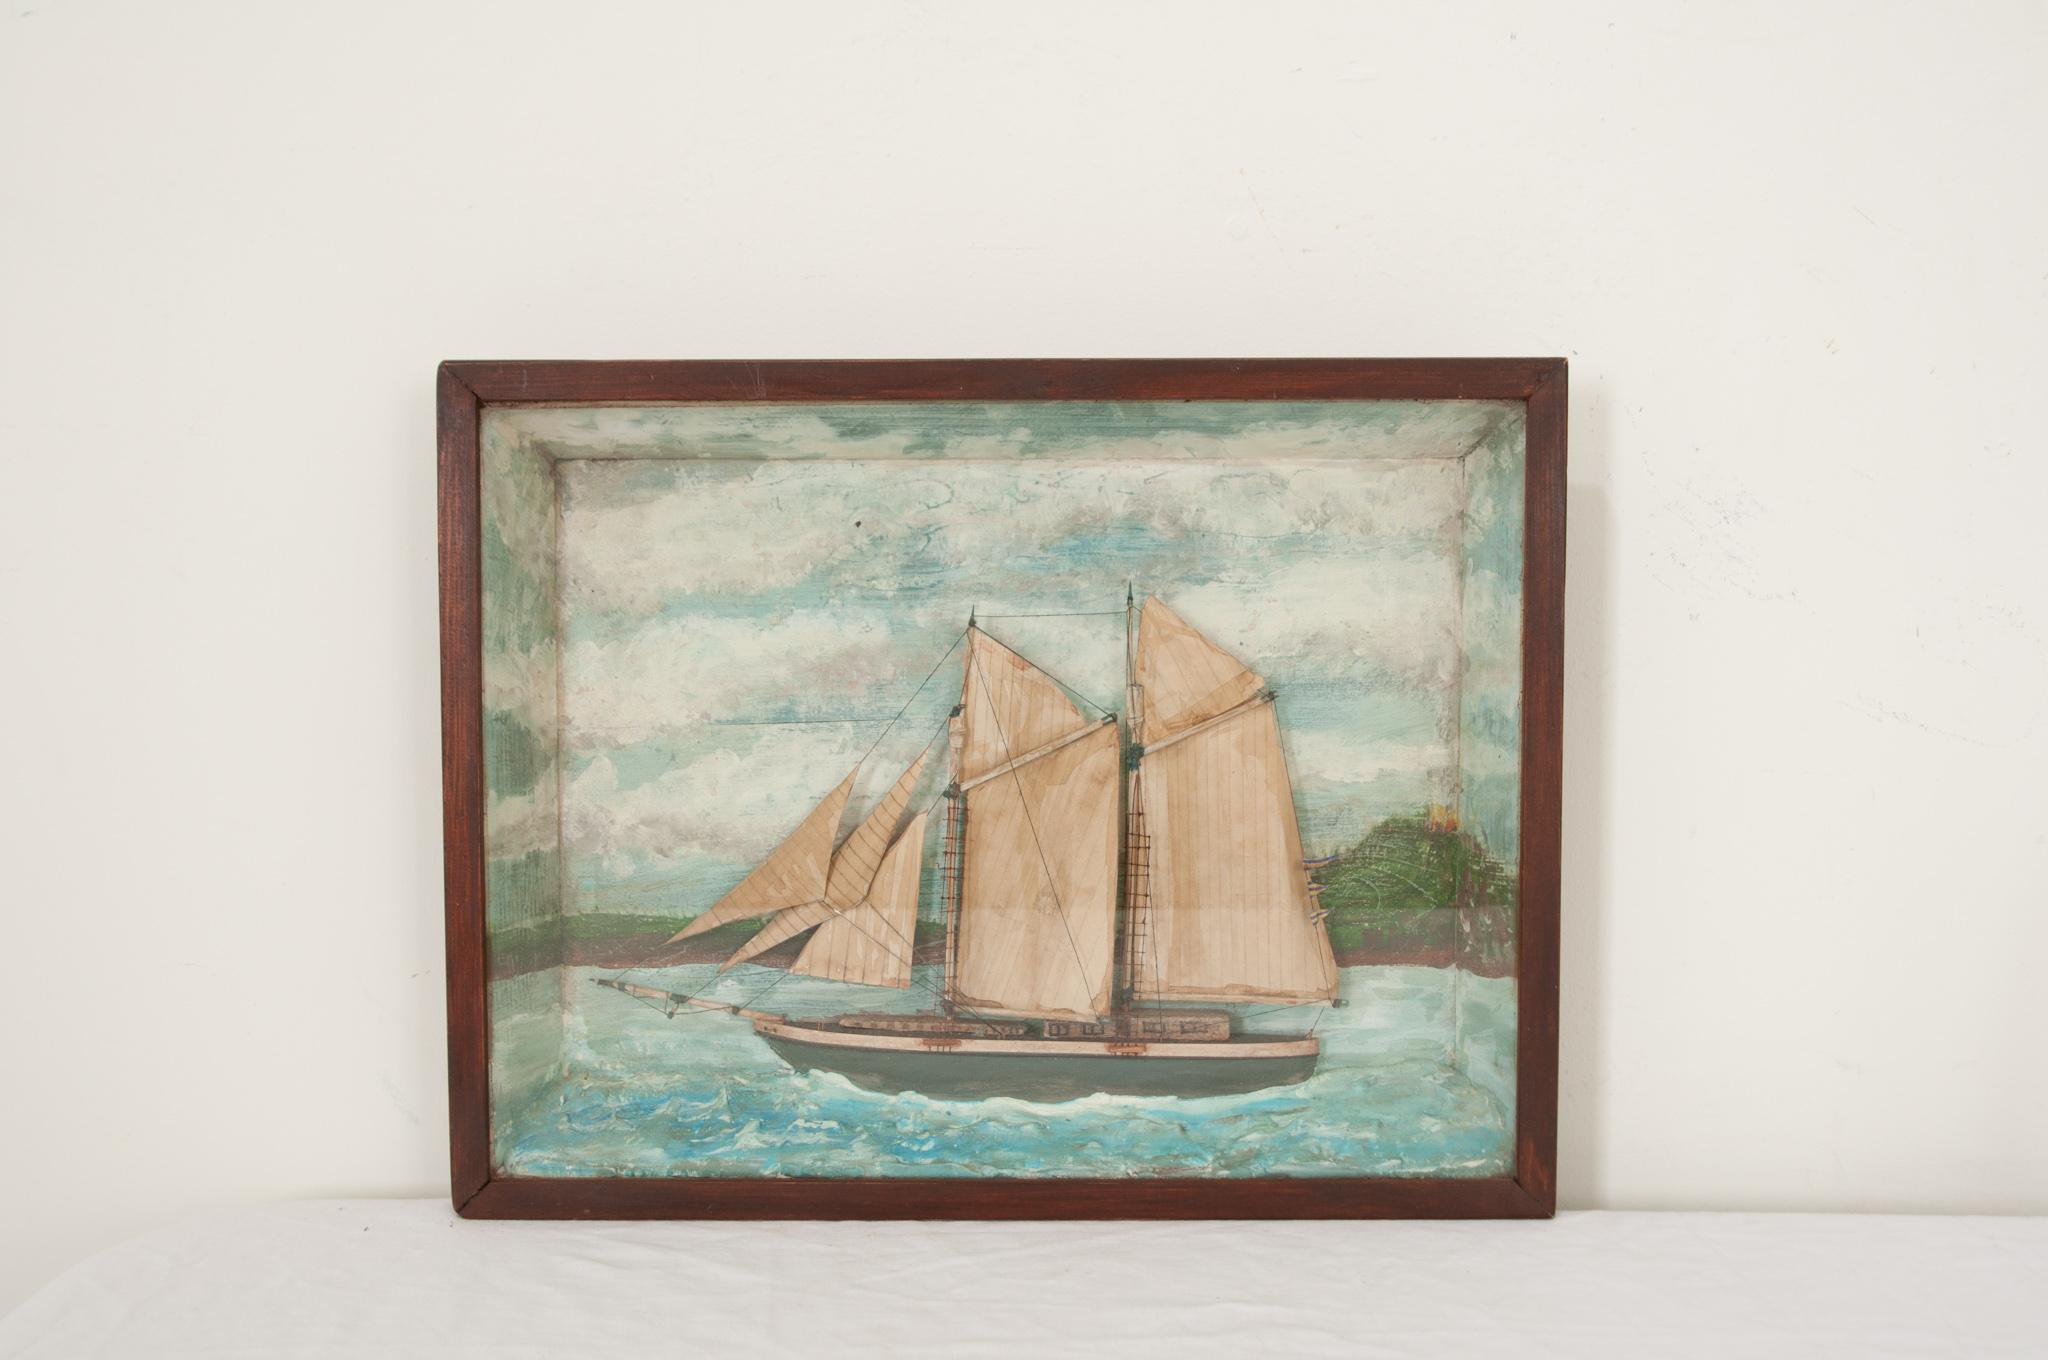 A brilliant nautical diorama hand-crafted in England circa 1890 featuring a sailing boat with beautifully detailed sails, masts, ropes, and netting. The boat is mounted on painted plaster waves and under glass in a wooden shadow box. These wonderful